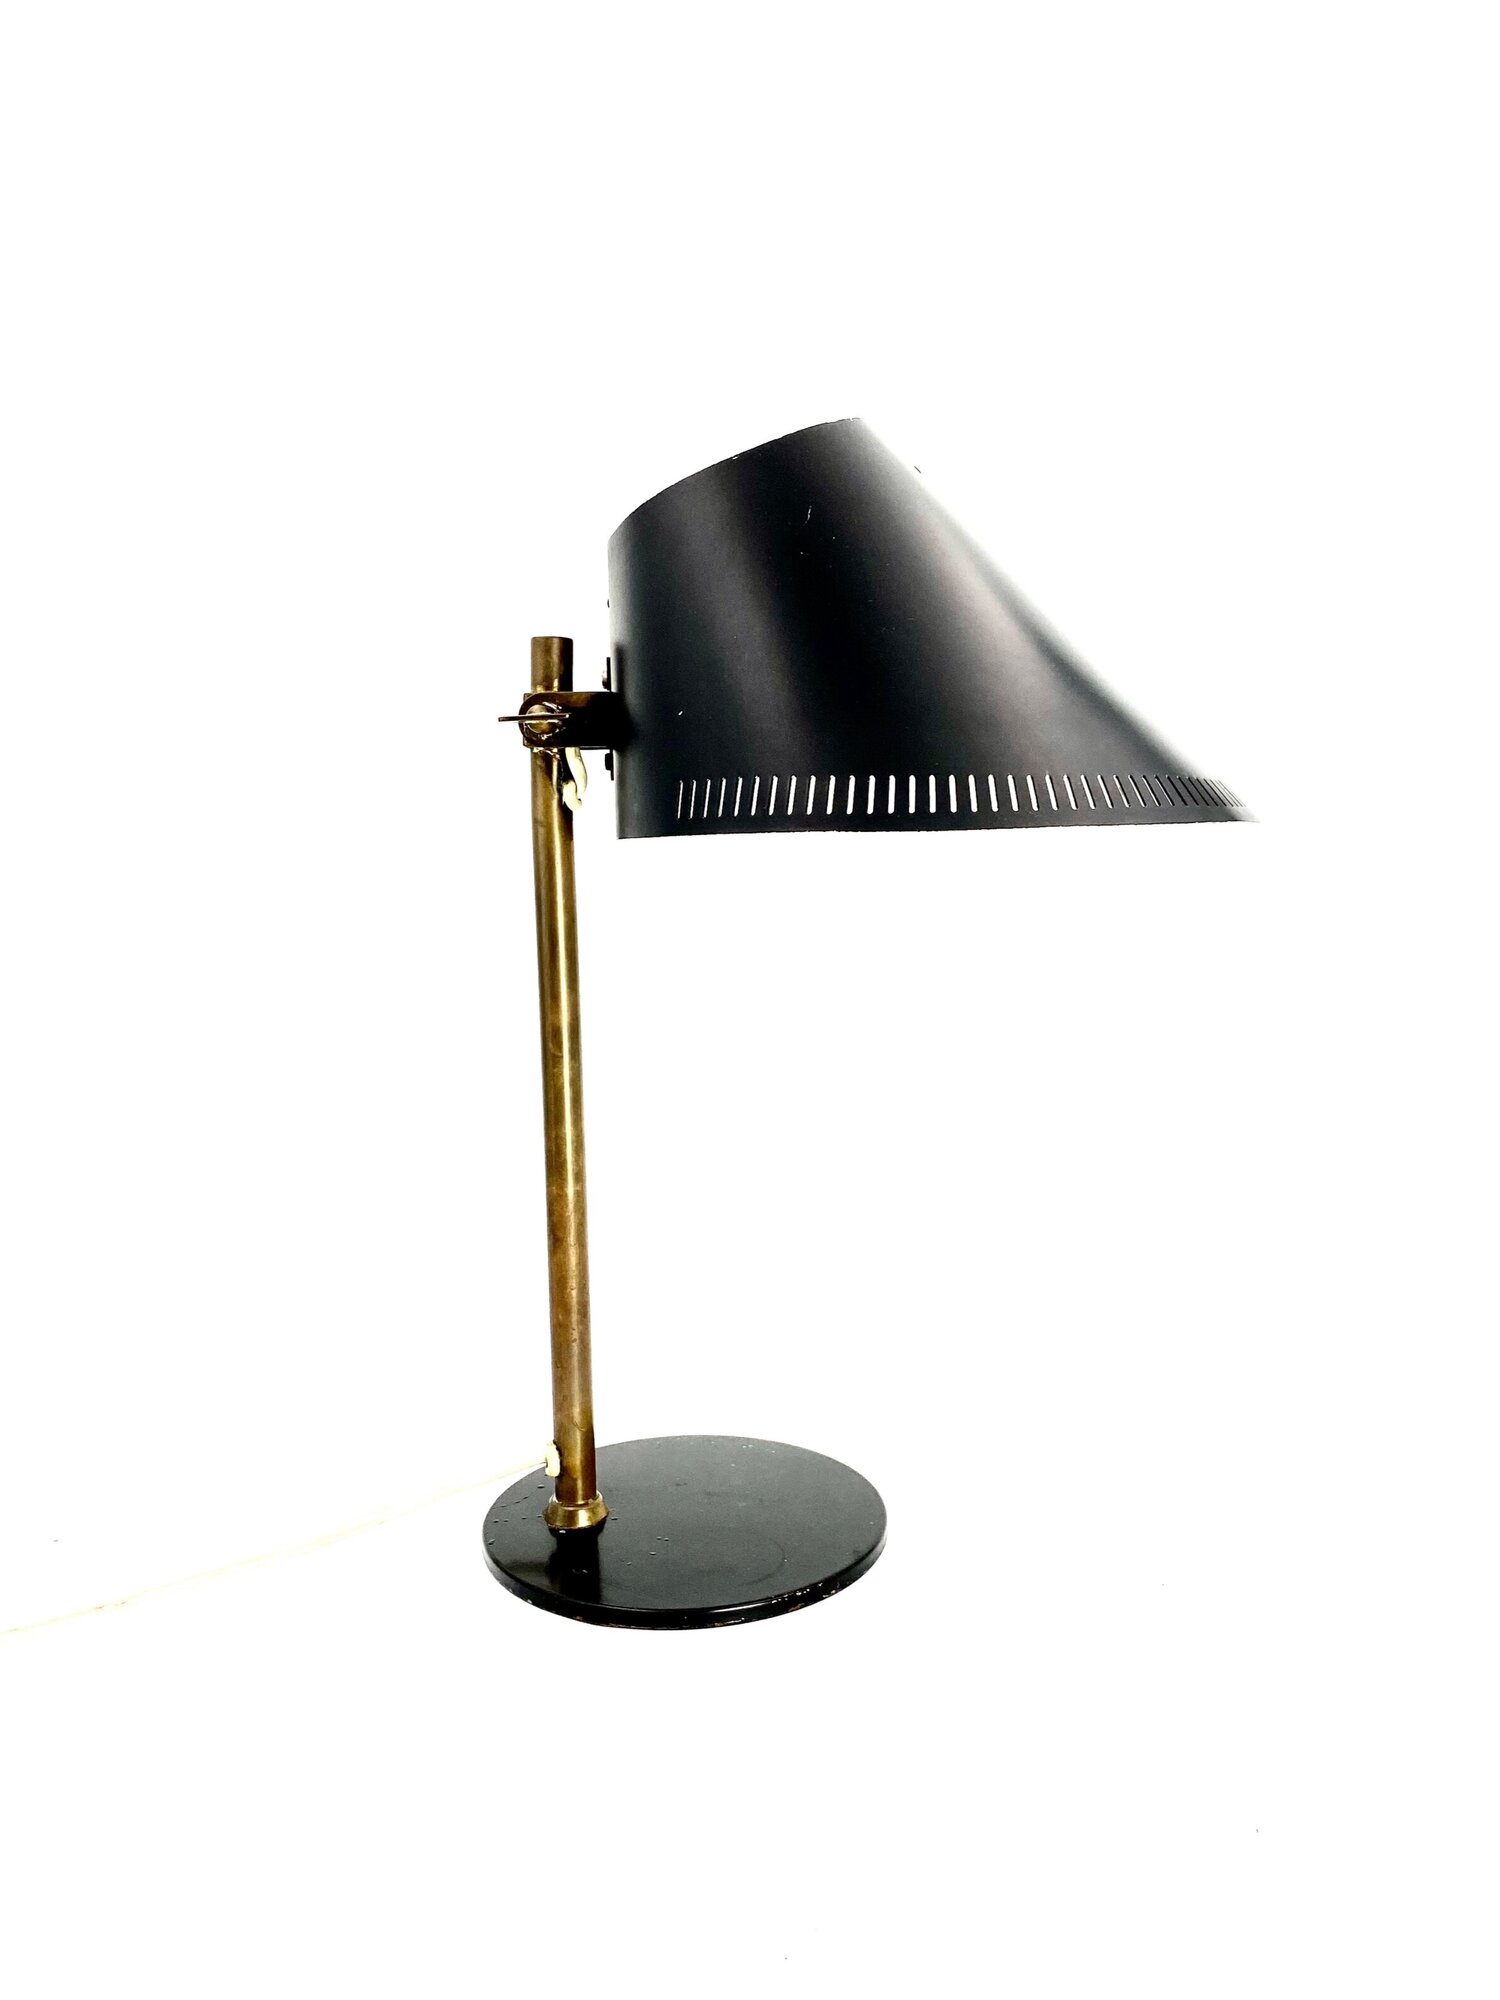 oversættelse ustabil Ruddy Paavo Tynell Black Brass Table Lamp mod. 9227, by Taito & Idman, Finland,  1958 circa — AENIGMA DESIGN GALLERY